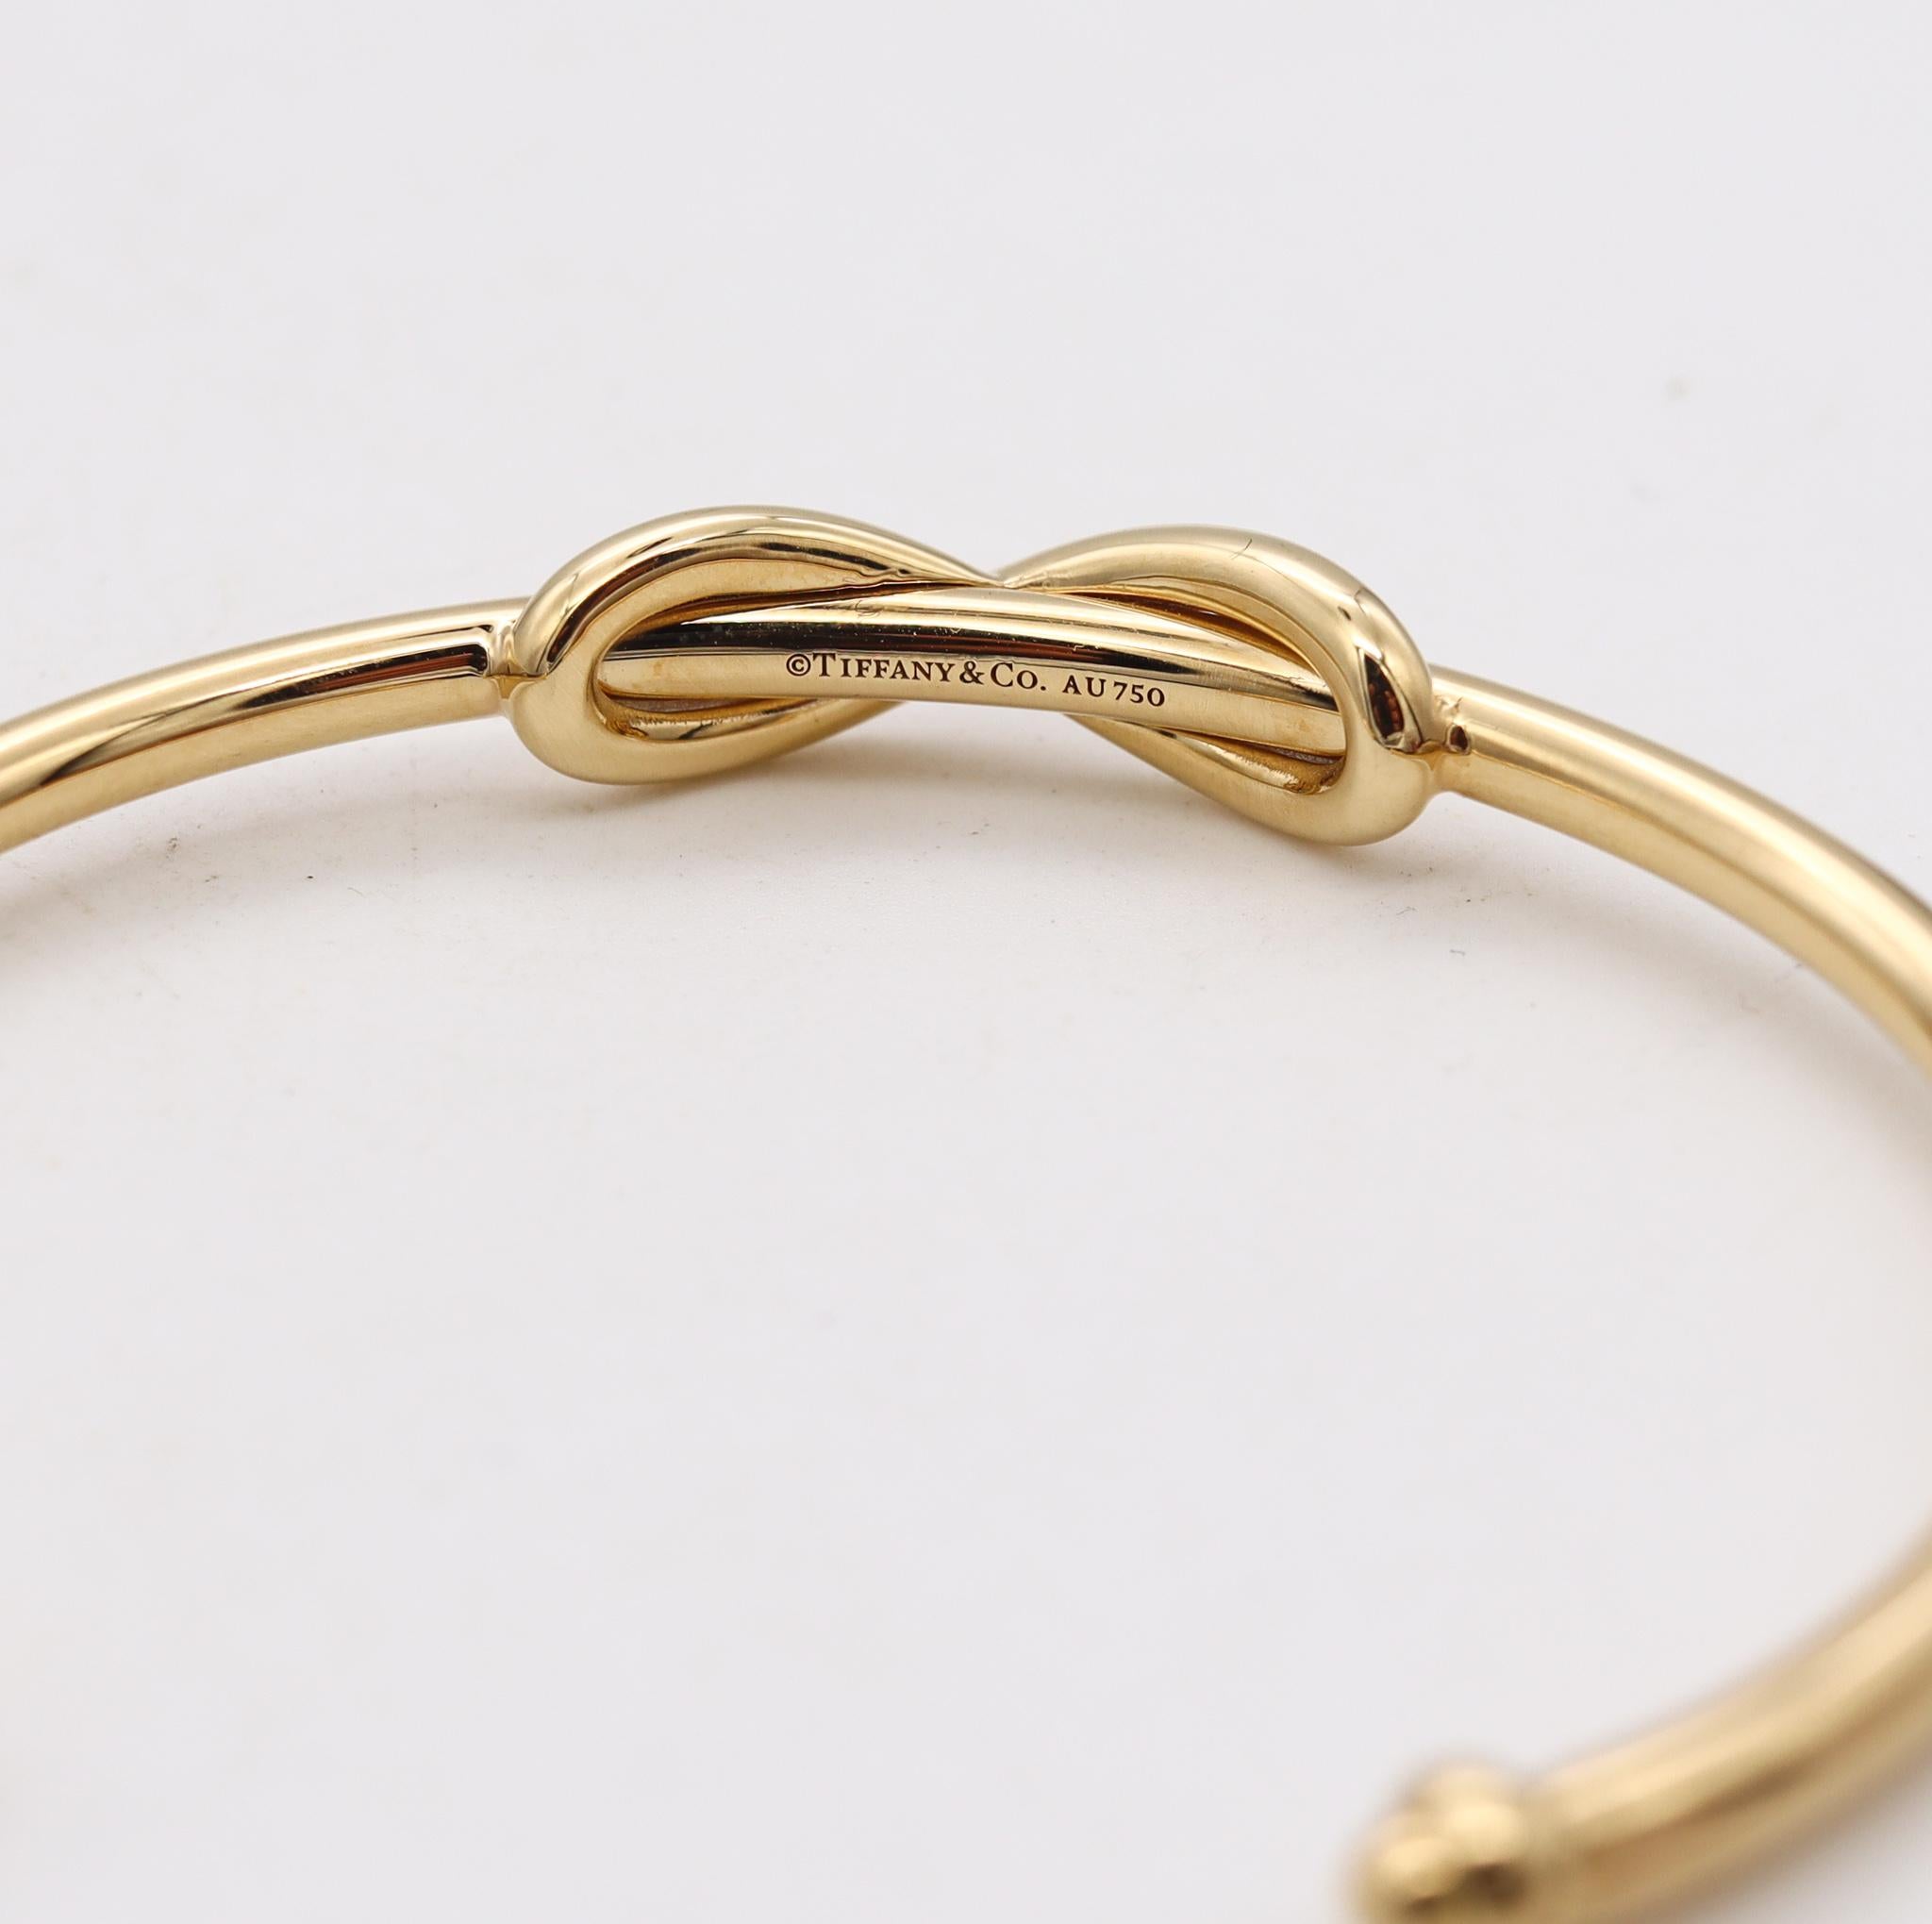 Modernist Tiffany Co Infinity Motif Cuff Bracelet In Solid 18Kt Yellow Gold With Boxes For Sale